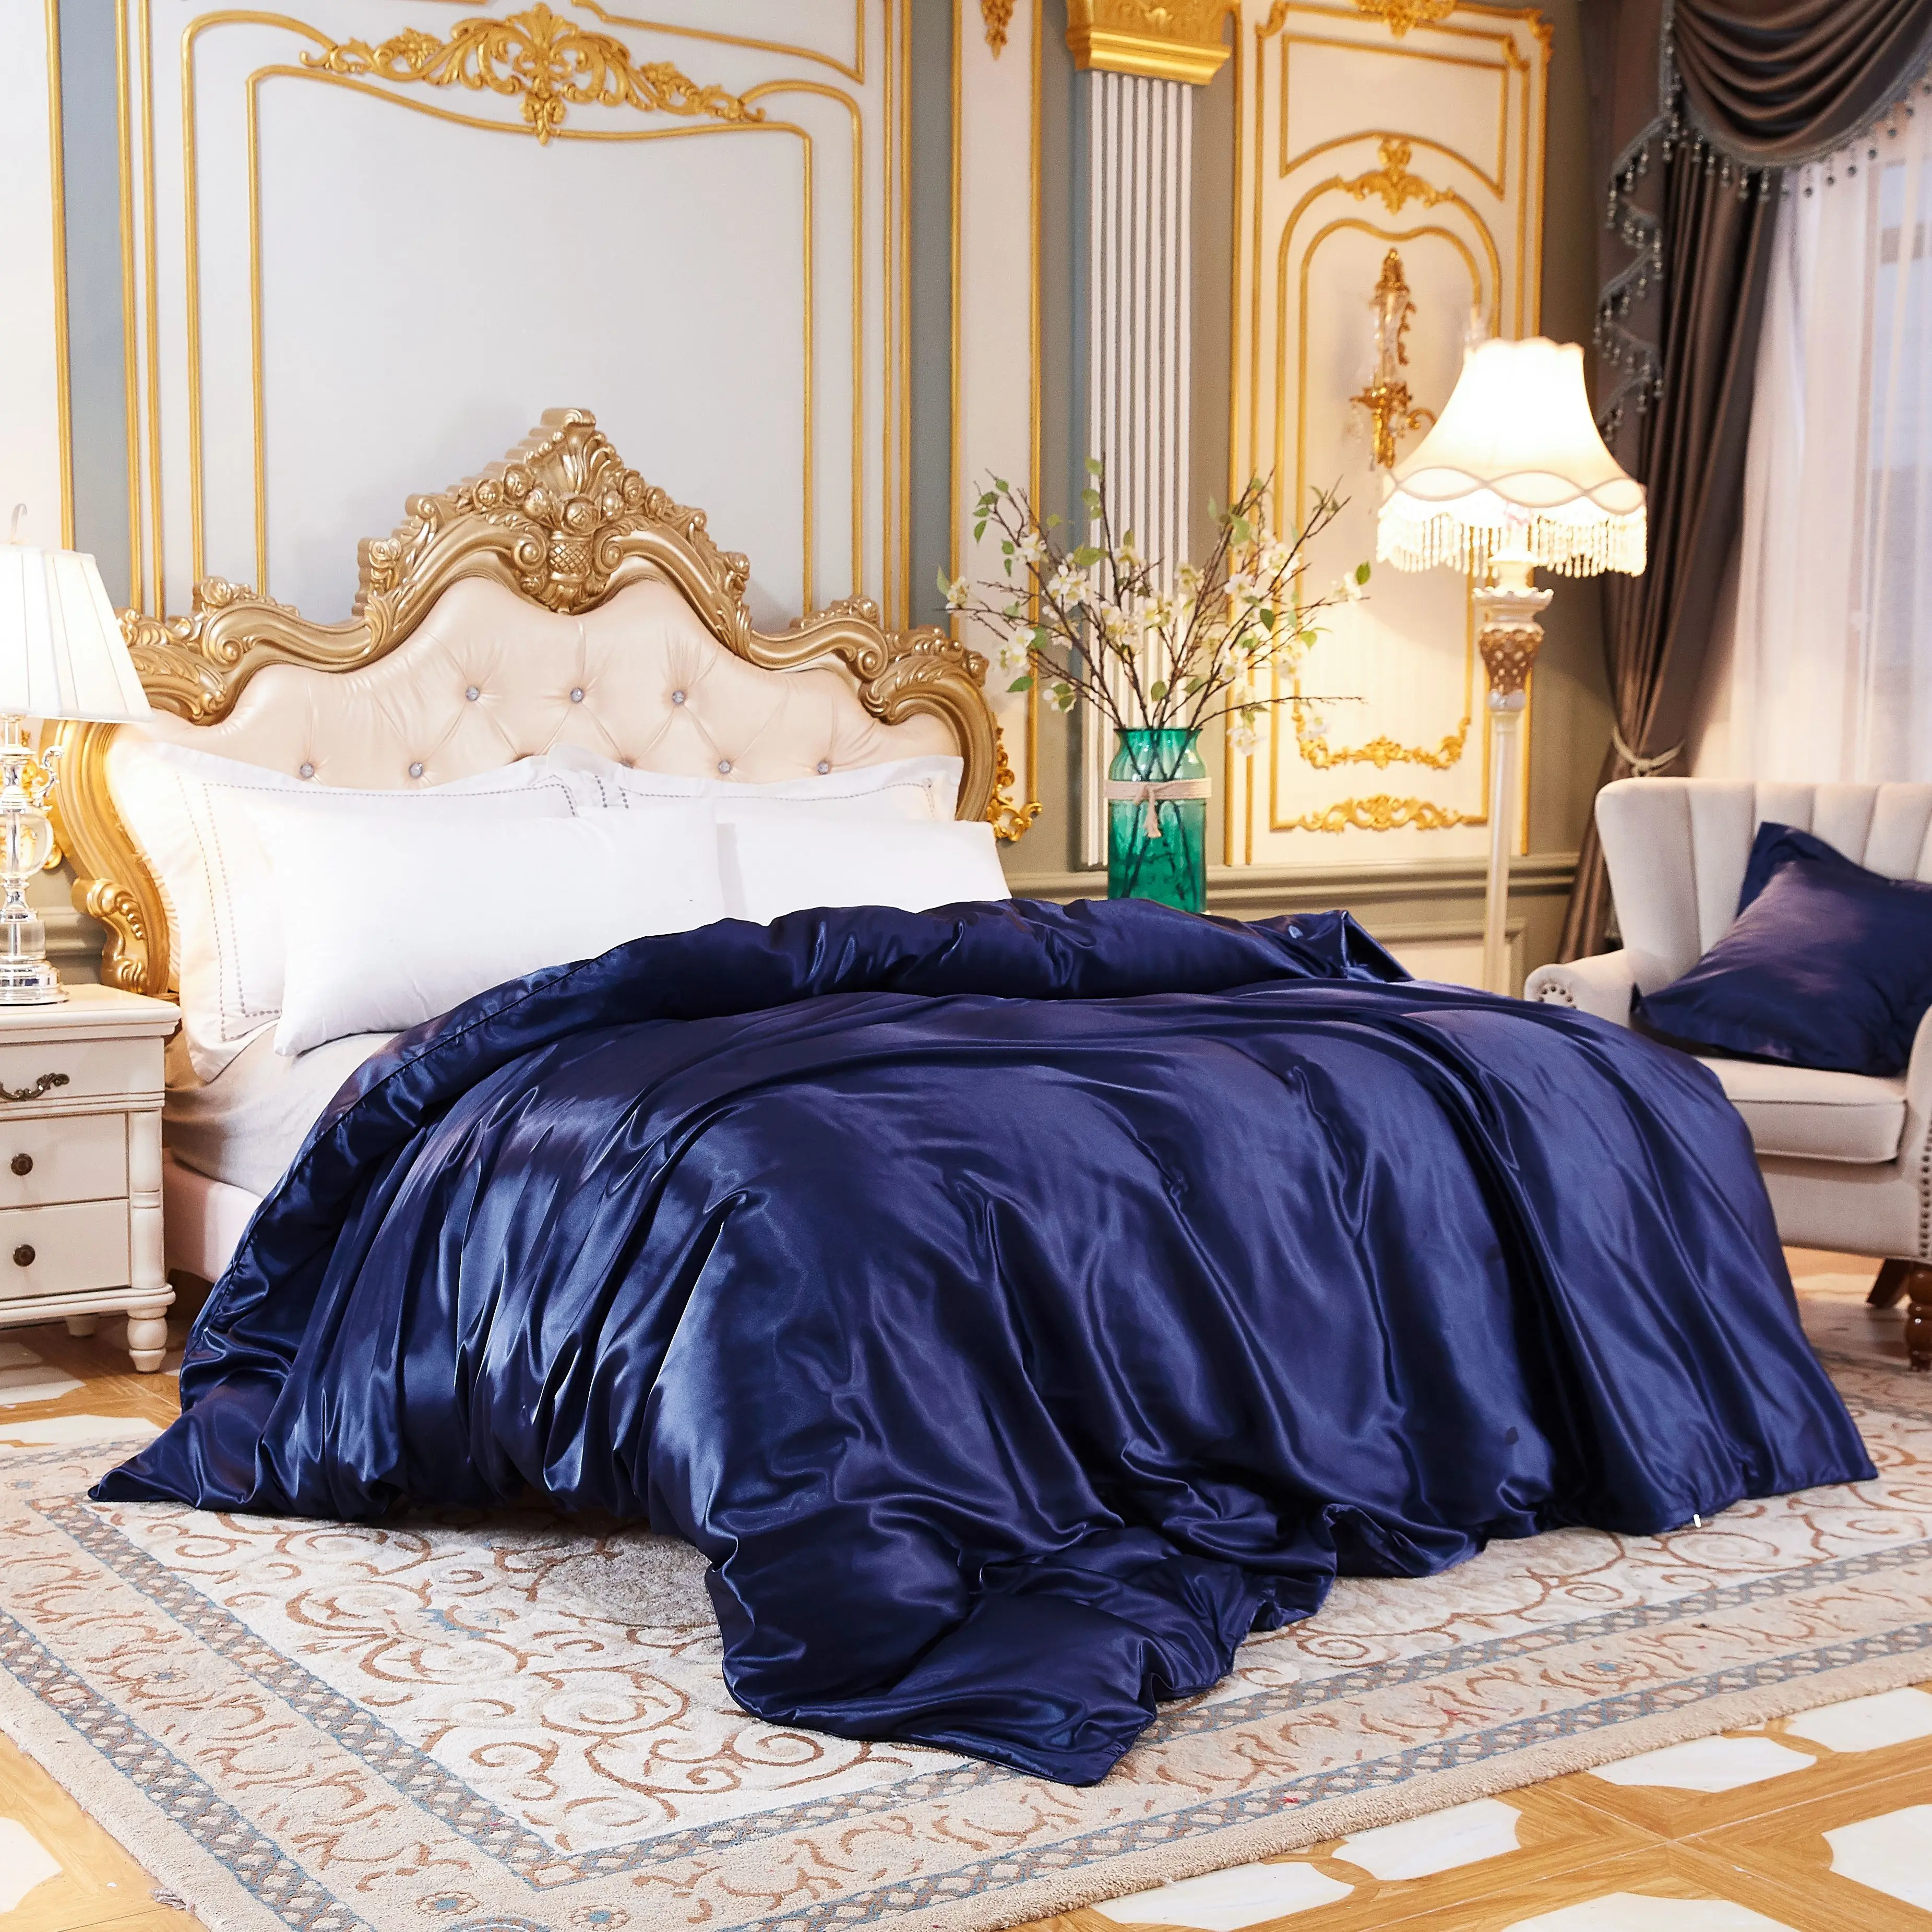 https://ae01.alicdn.com/kf/H838dfa7121ec42b3bb2dc9ac95529dd8M/New-Luxury-Bedding-Sets-Duvet-Cover-Flat-Fitted-Sheet-Twin-Full-Queen-King-size-set-Black.jpg